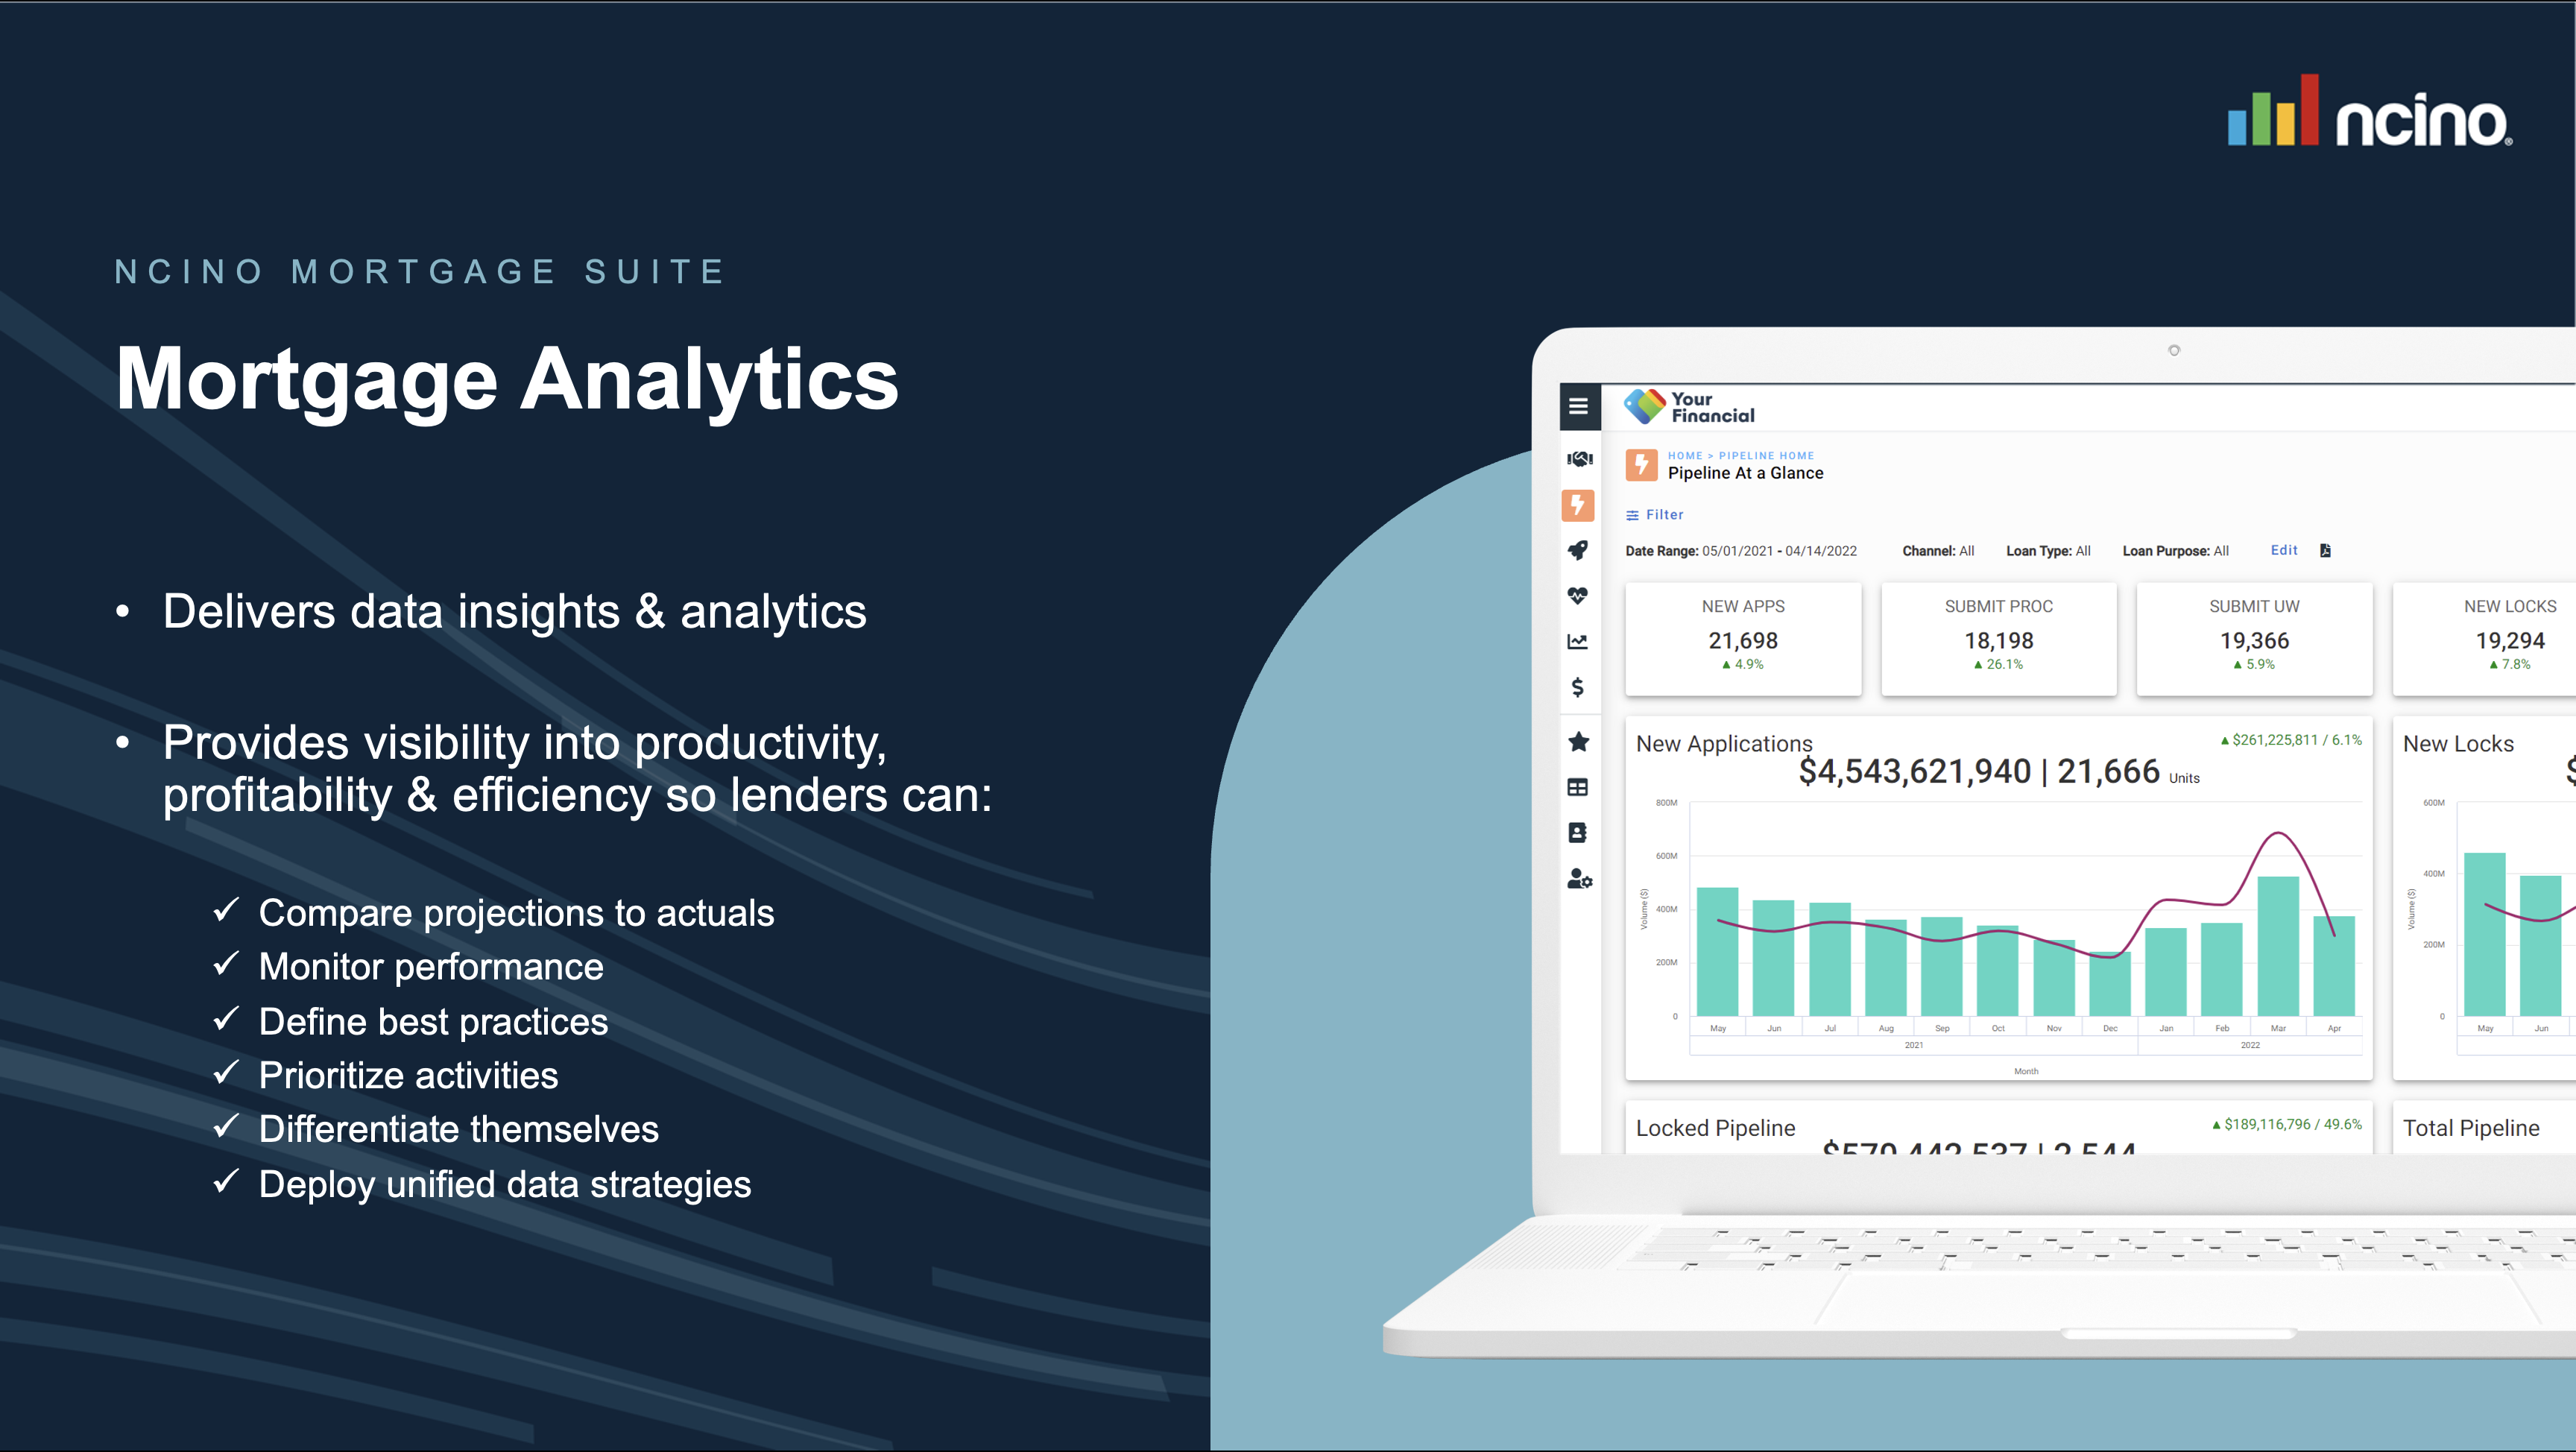 With intuitive dashboards, instant pipeline and performance data views, loan-level drill-downs, scorecards, and more, our Mortgage Analytics product helps financial institutions deploy a unified data strategy to increase productivity and efficiency.